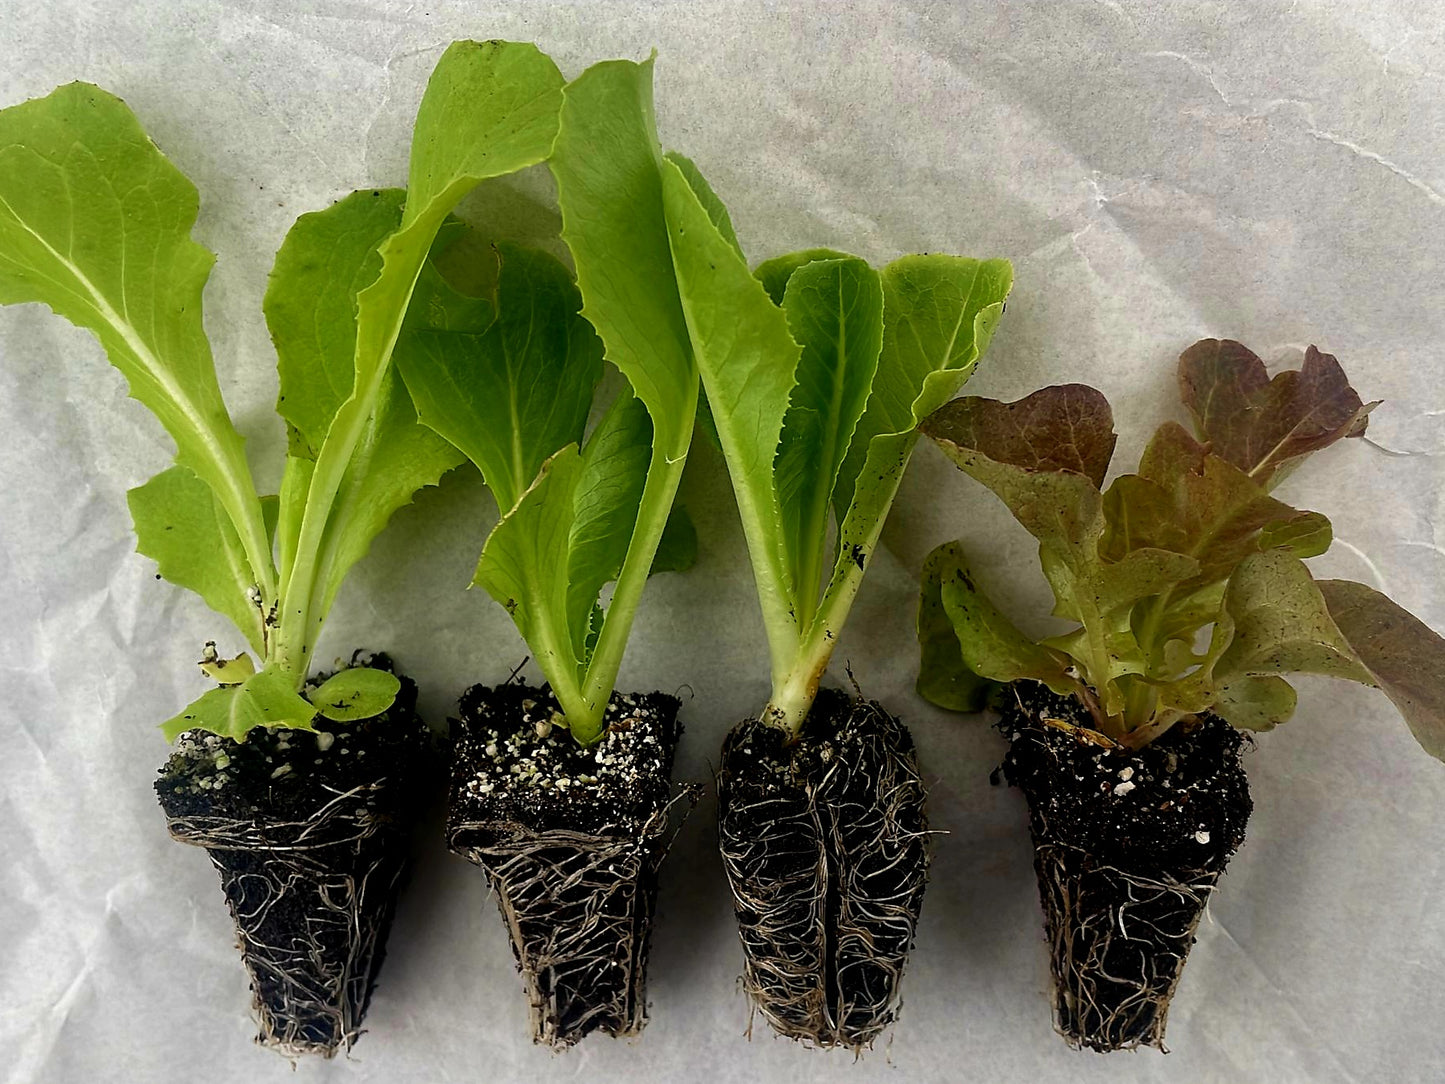 Monthly Subscription Box "Grow Your Own" Plug Plants Vegetables